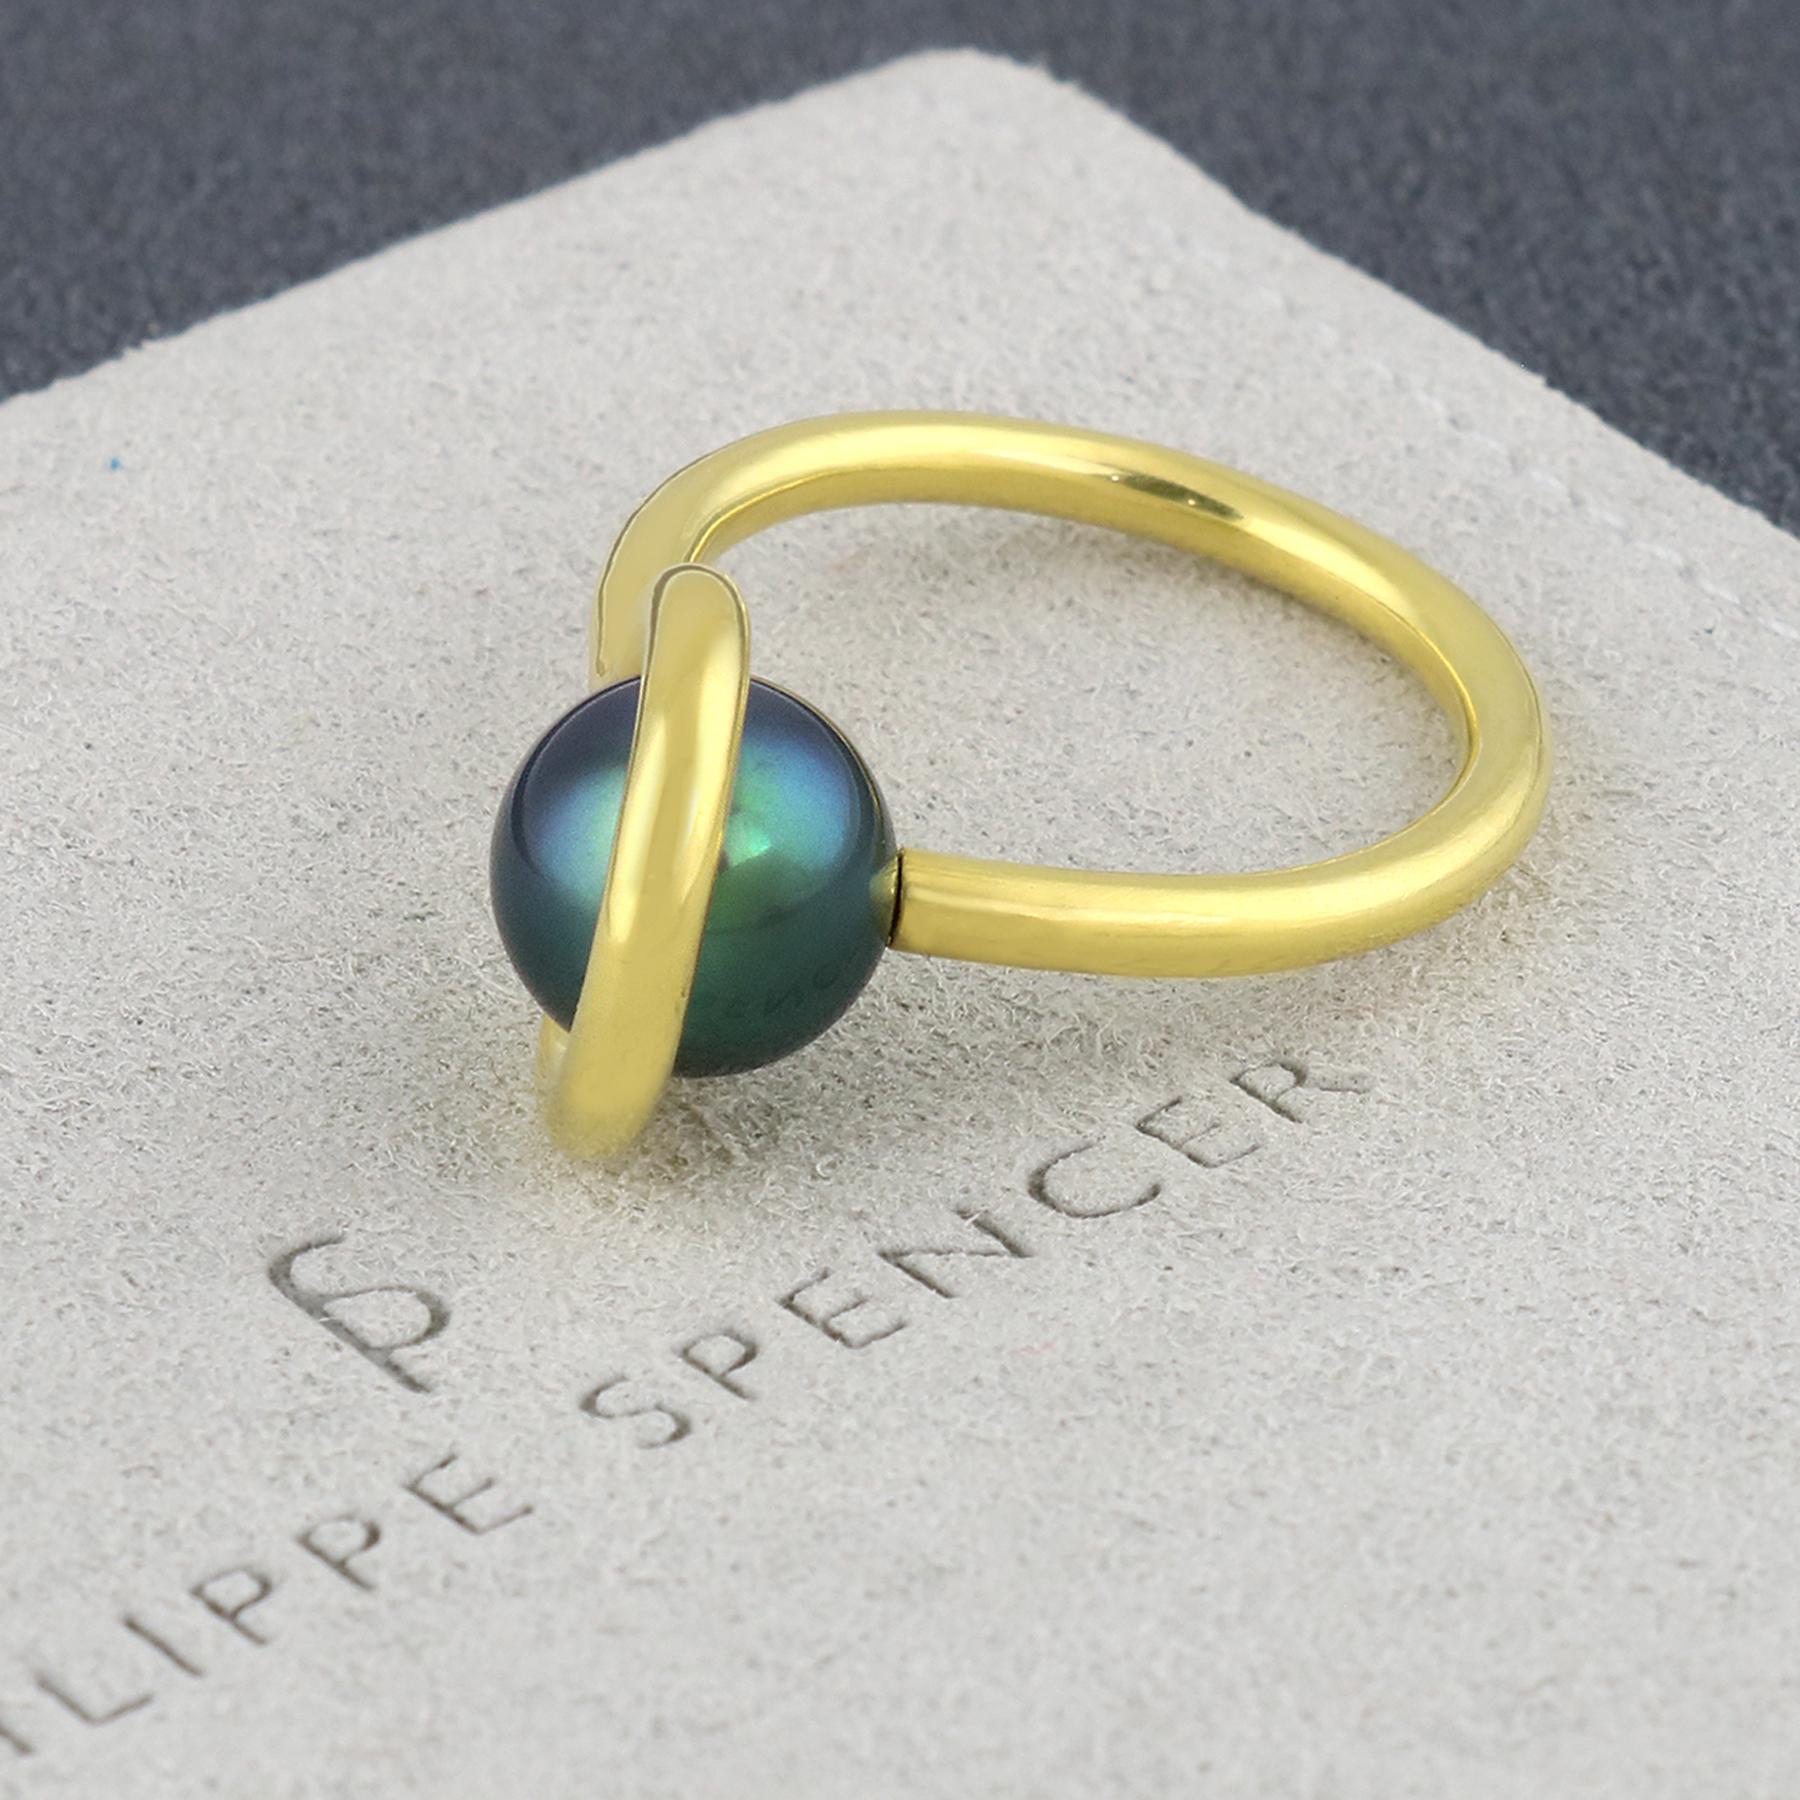 PHILIPPE SPENCER - 9.3mm AA Grade Tahitian Black Pearl (Rare Peacock Hue) suspended in Pure 20K Gold 